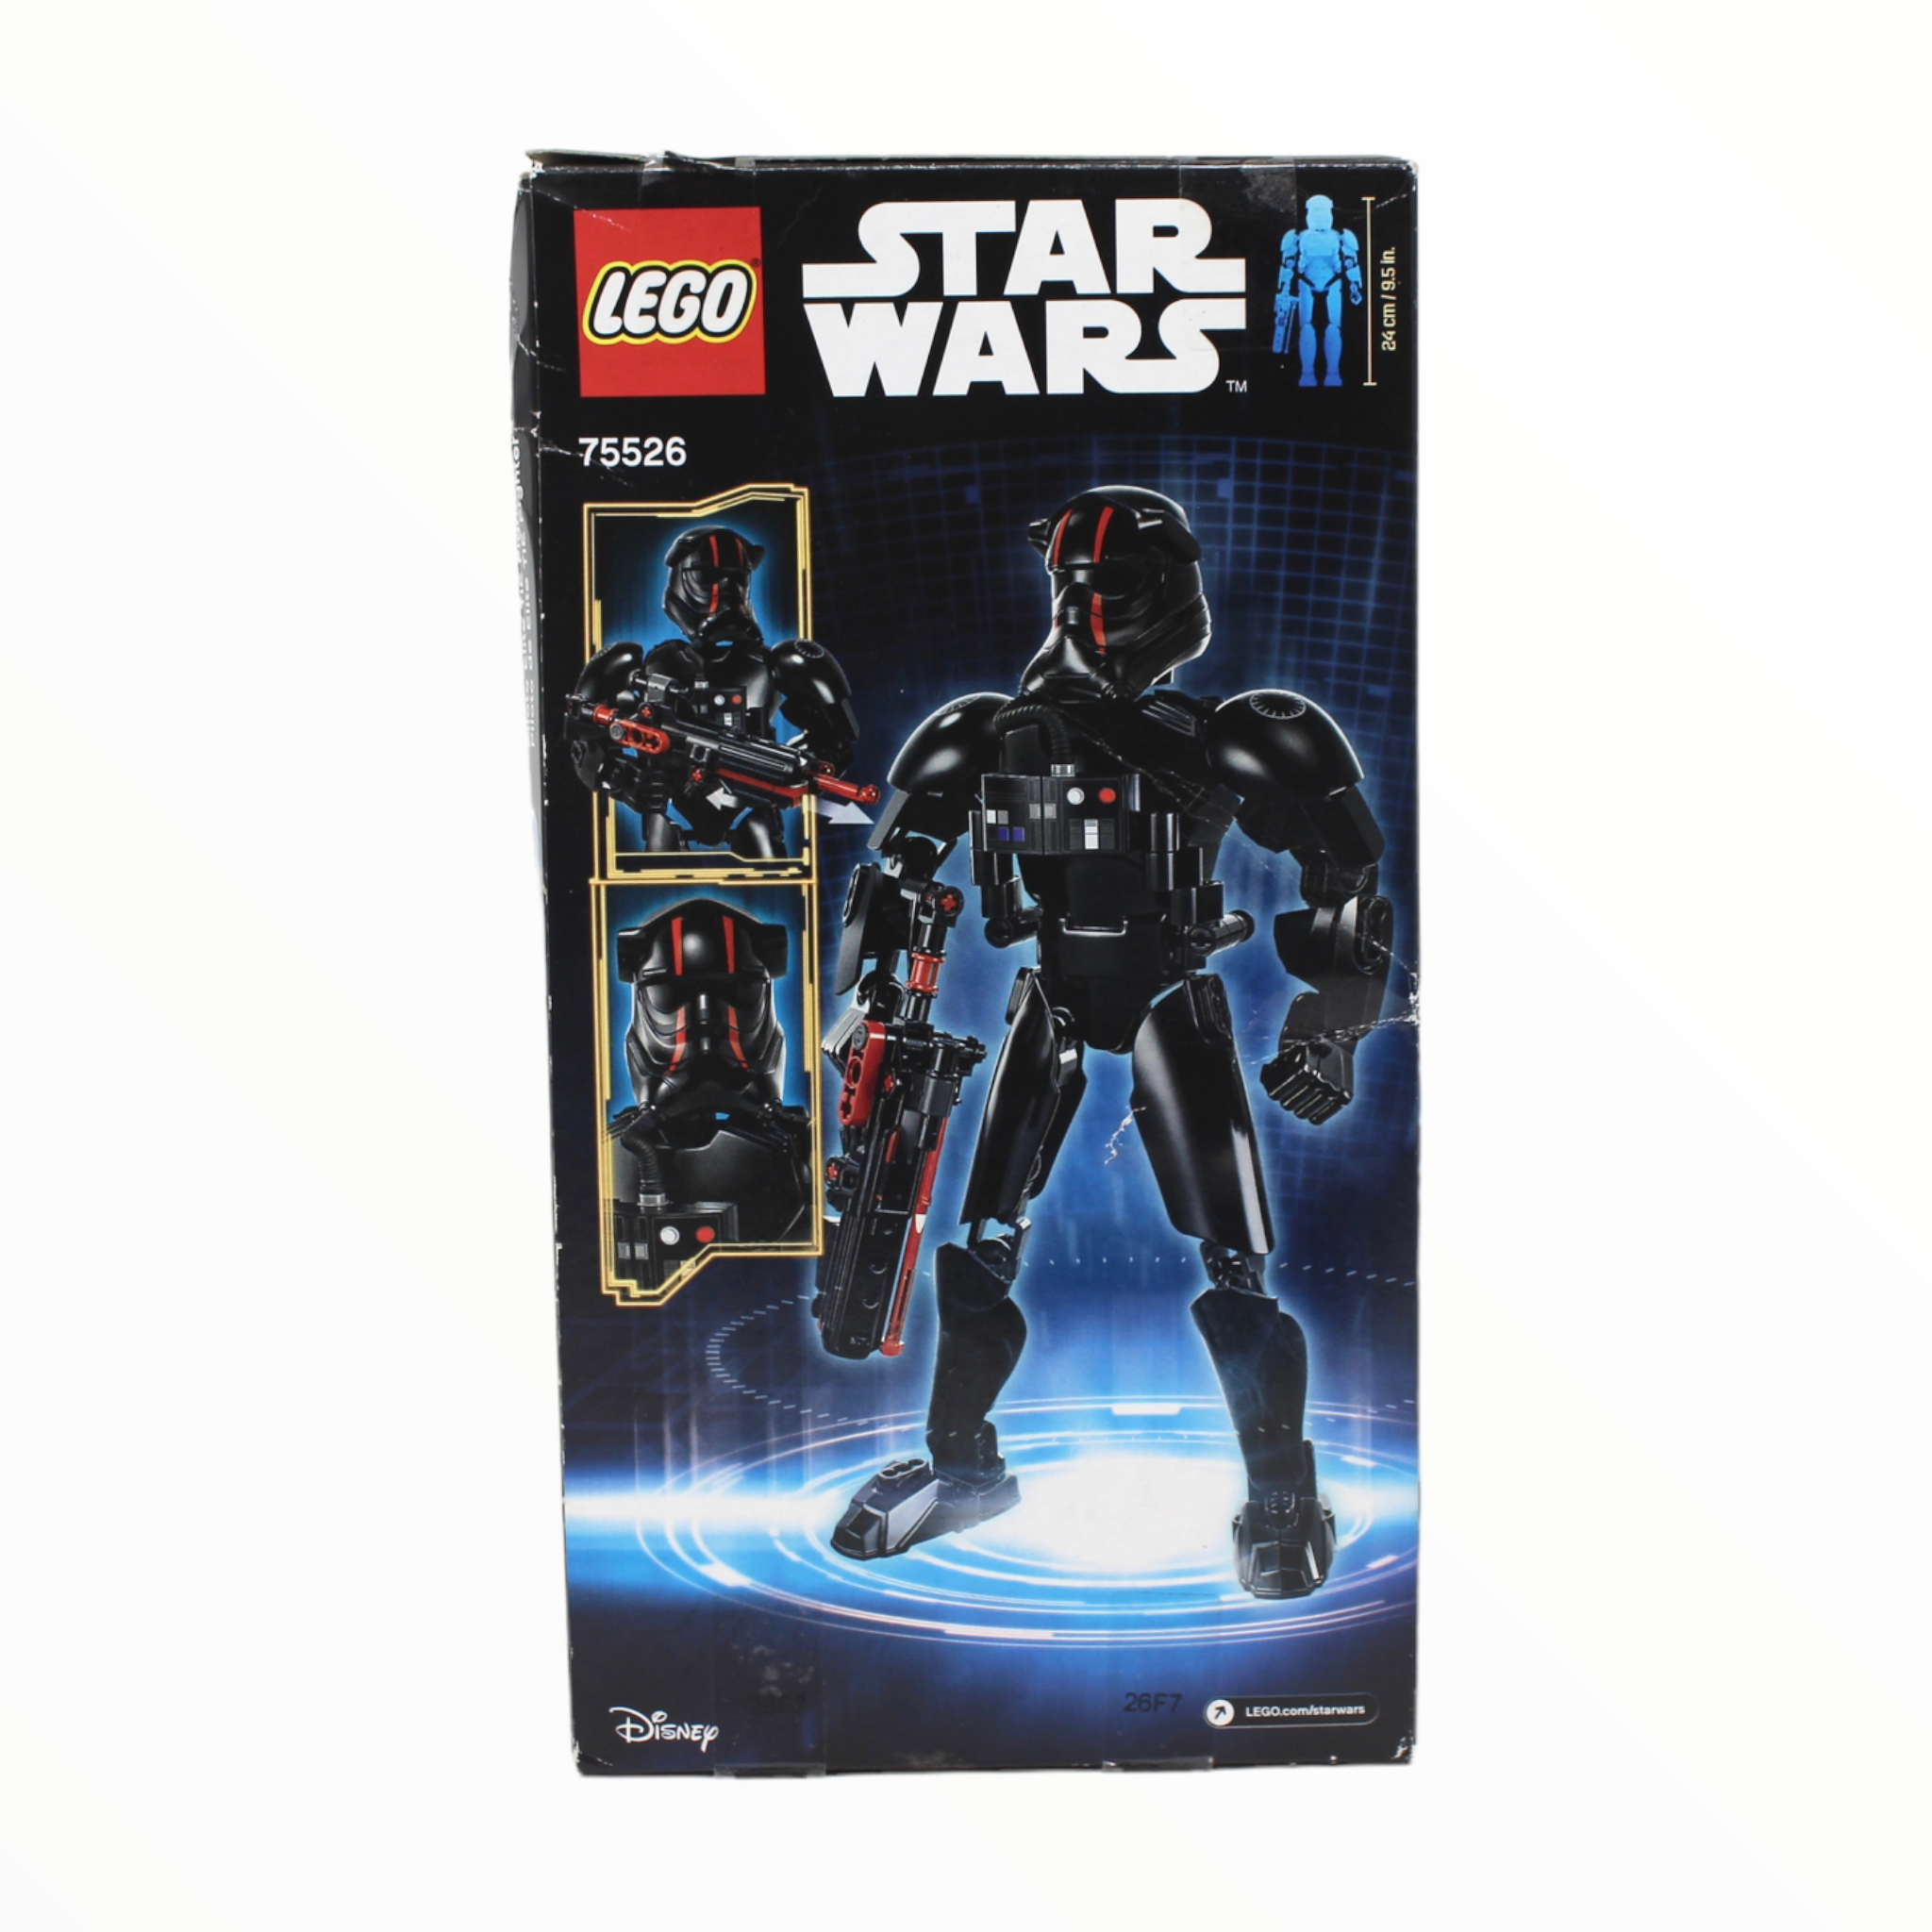 Certified Used Set 75526 Star Wars Buildable Figures Elite TIE Fighter Pilot (open box, sealed bags)